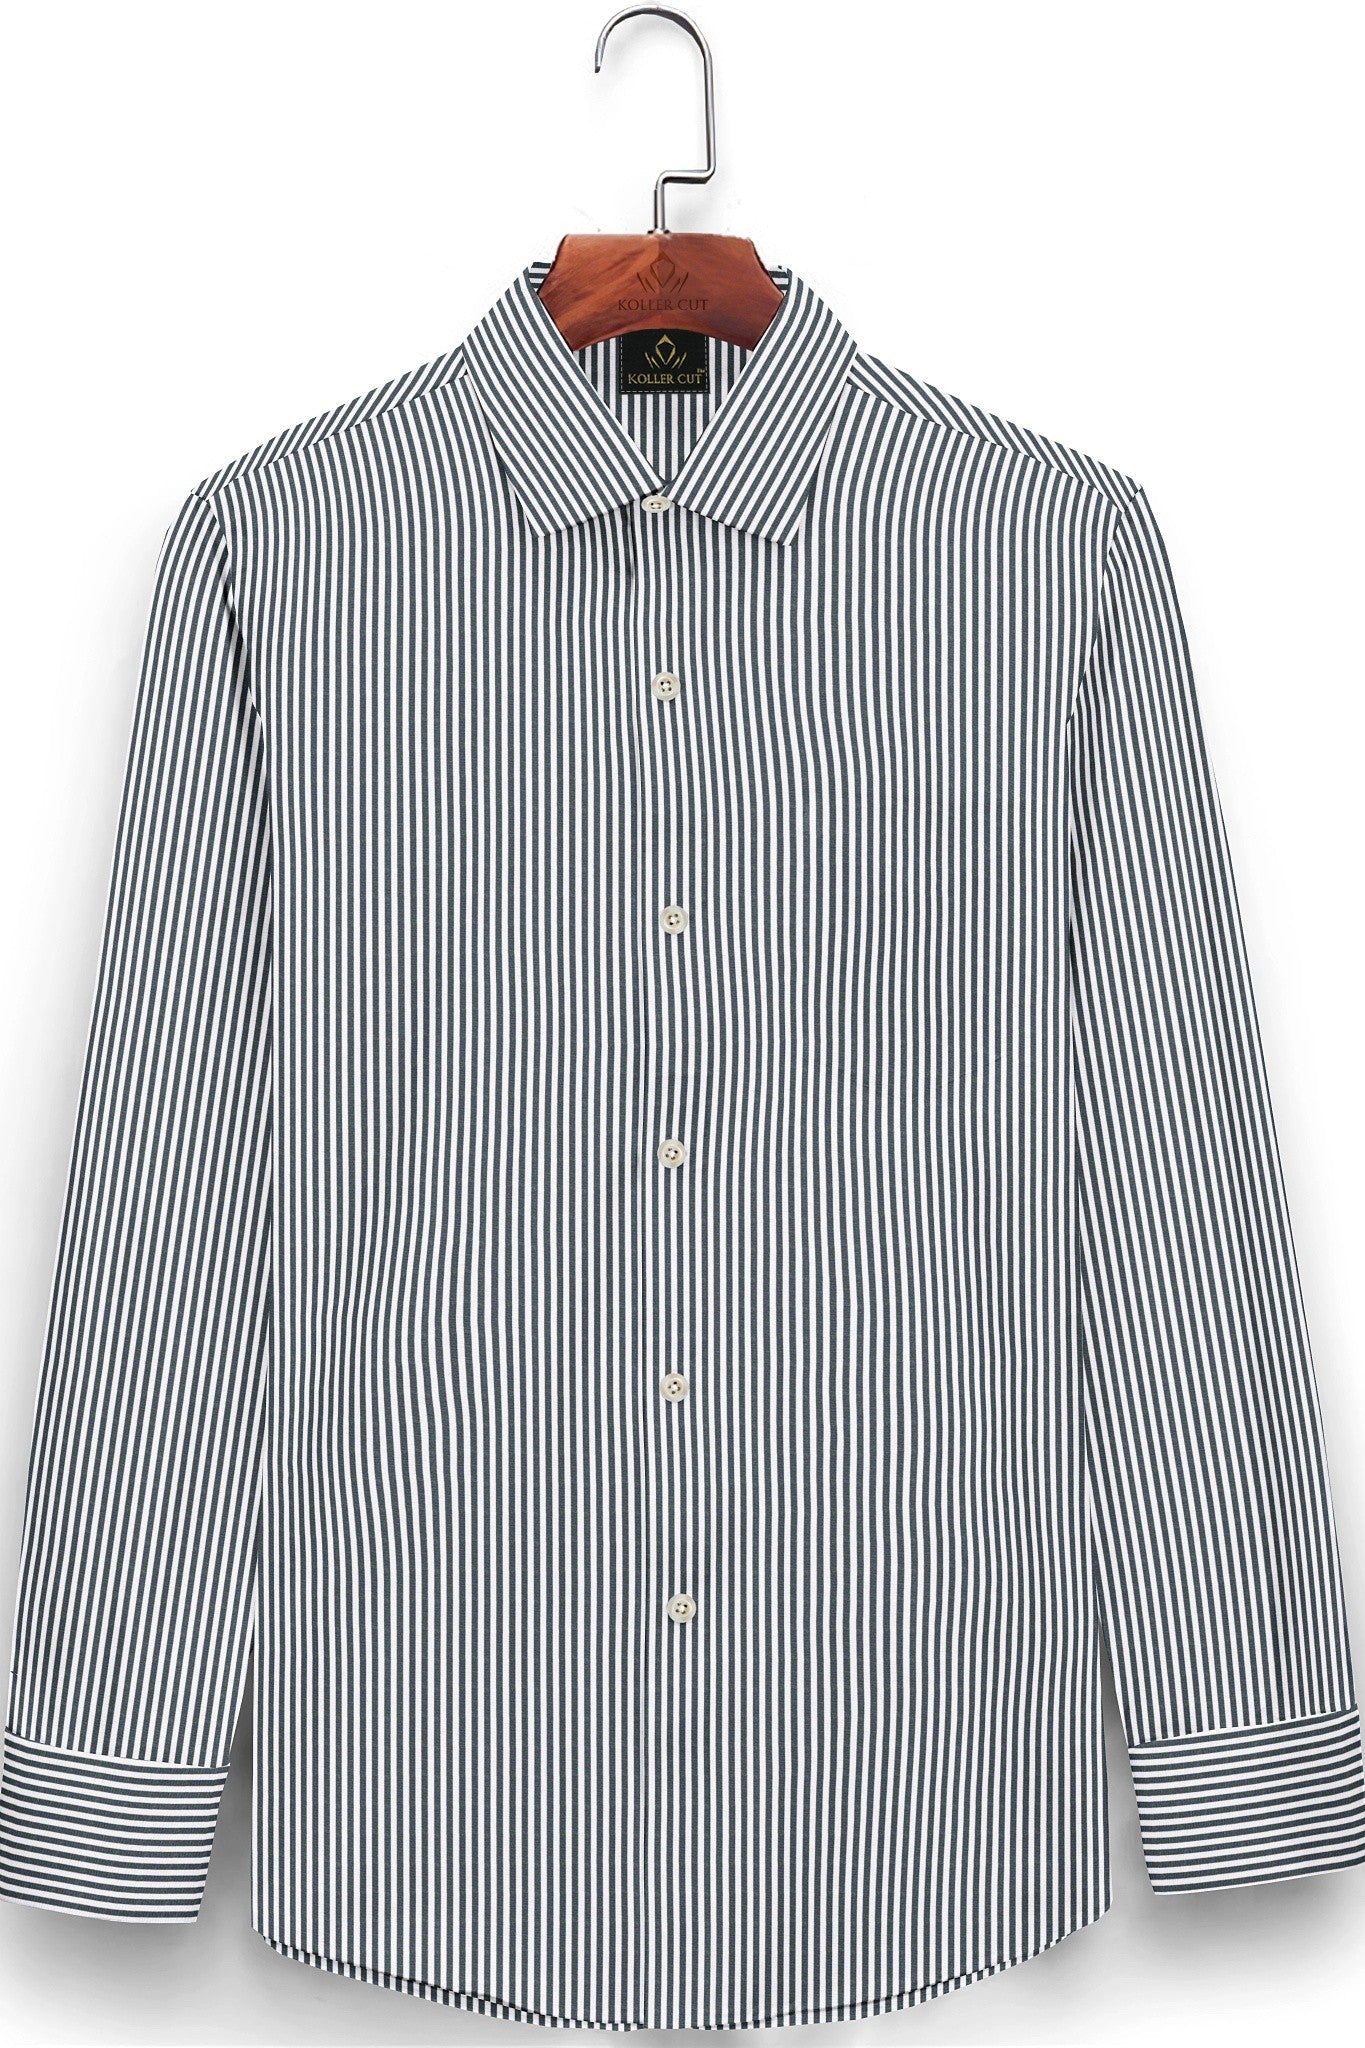 Charcoal Black and White Candy Stripes Cotton Shirt